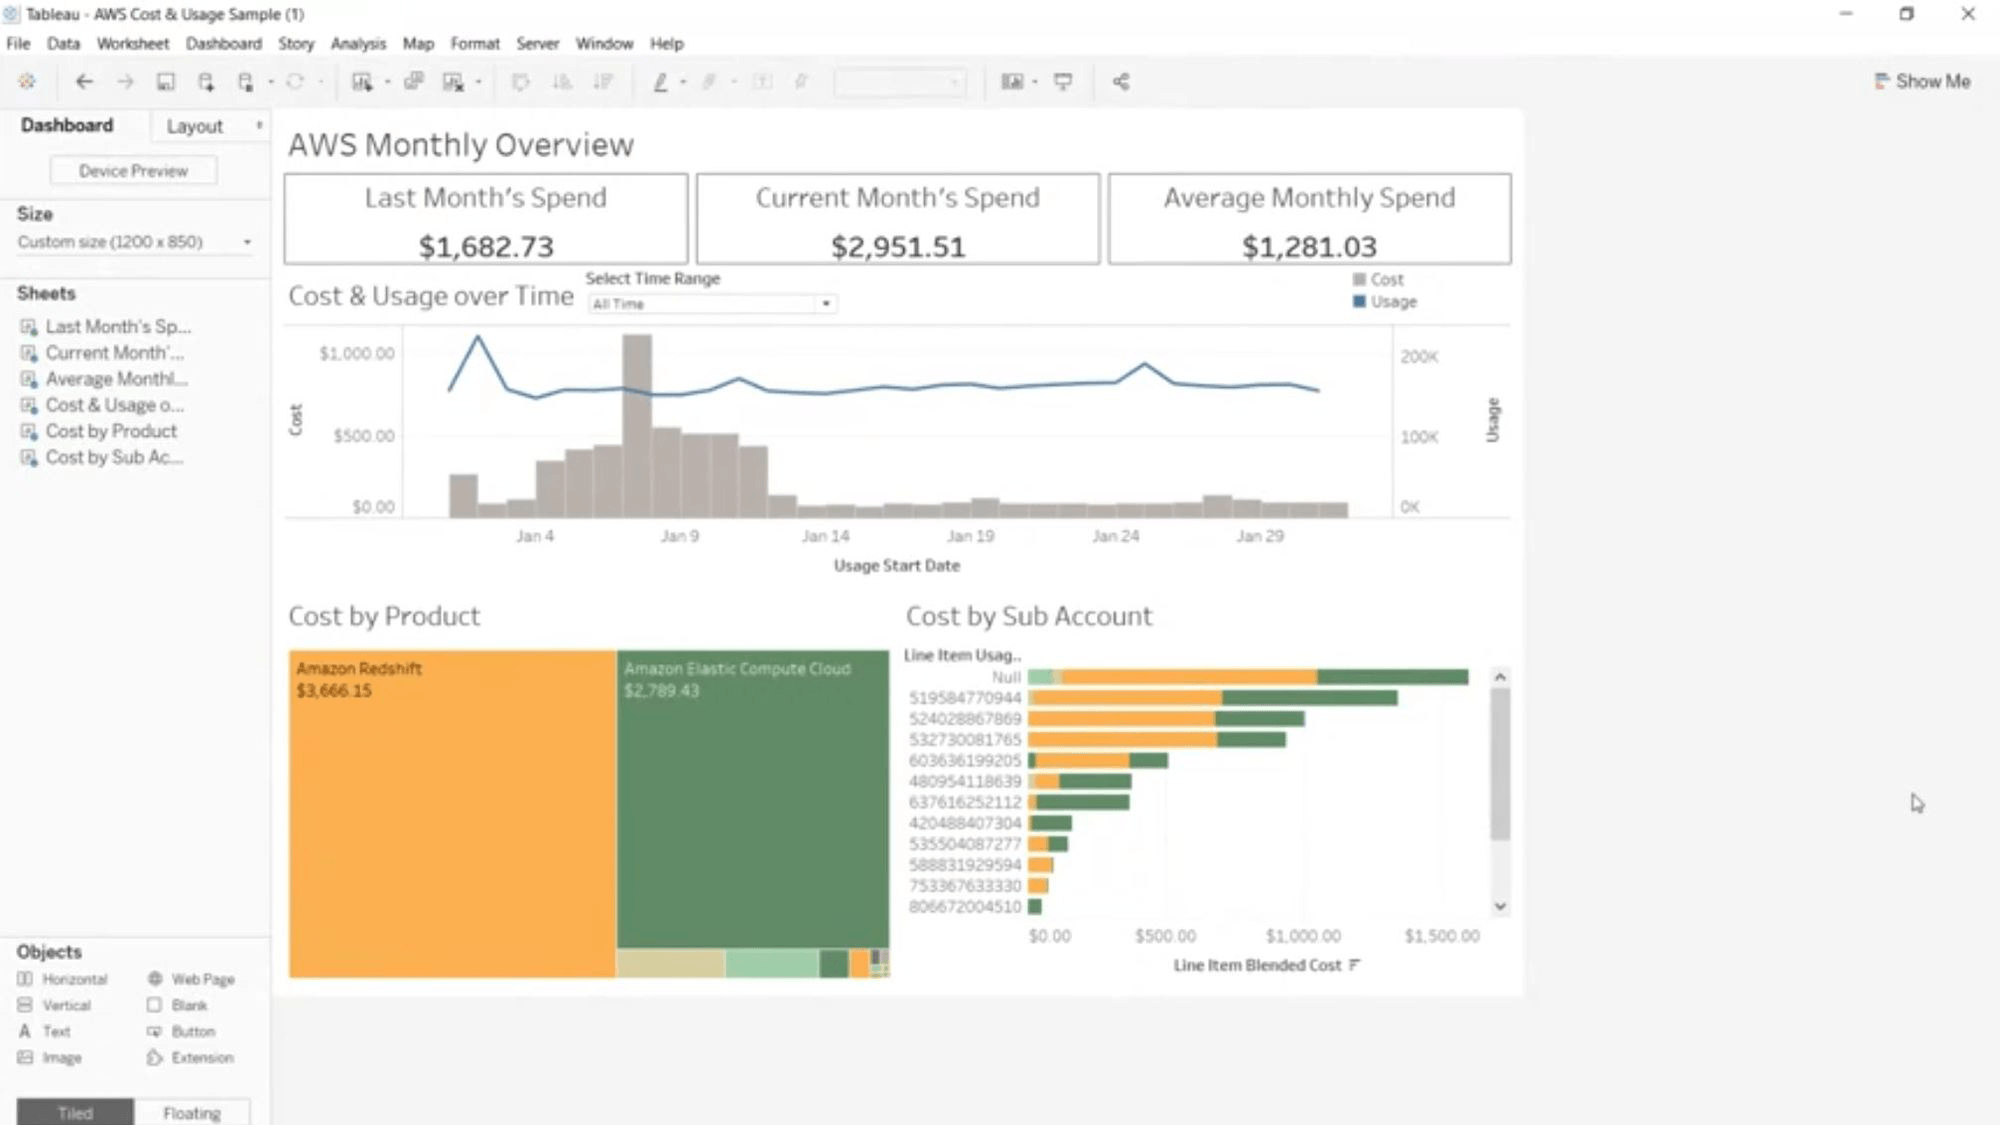 Navigate to Optimizing your cloud investments with Tableau